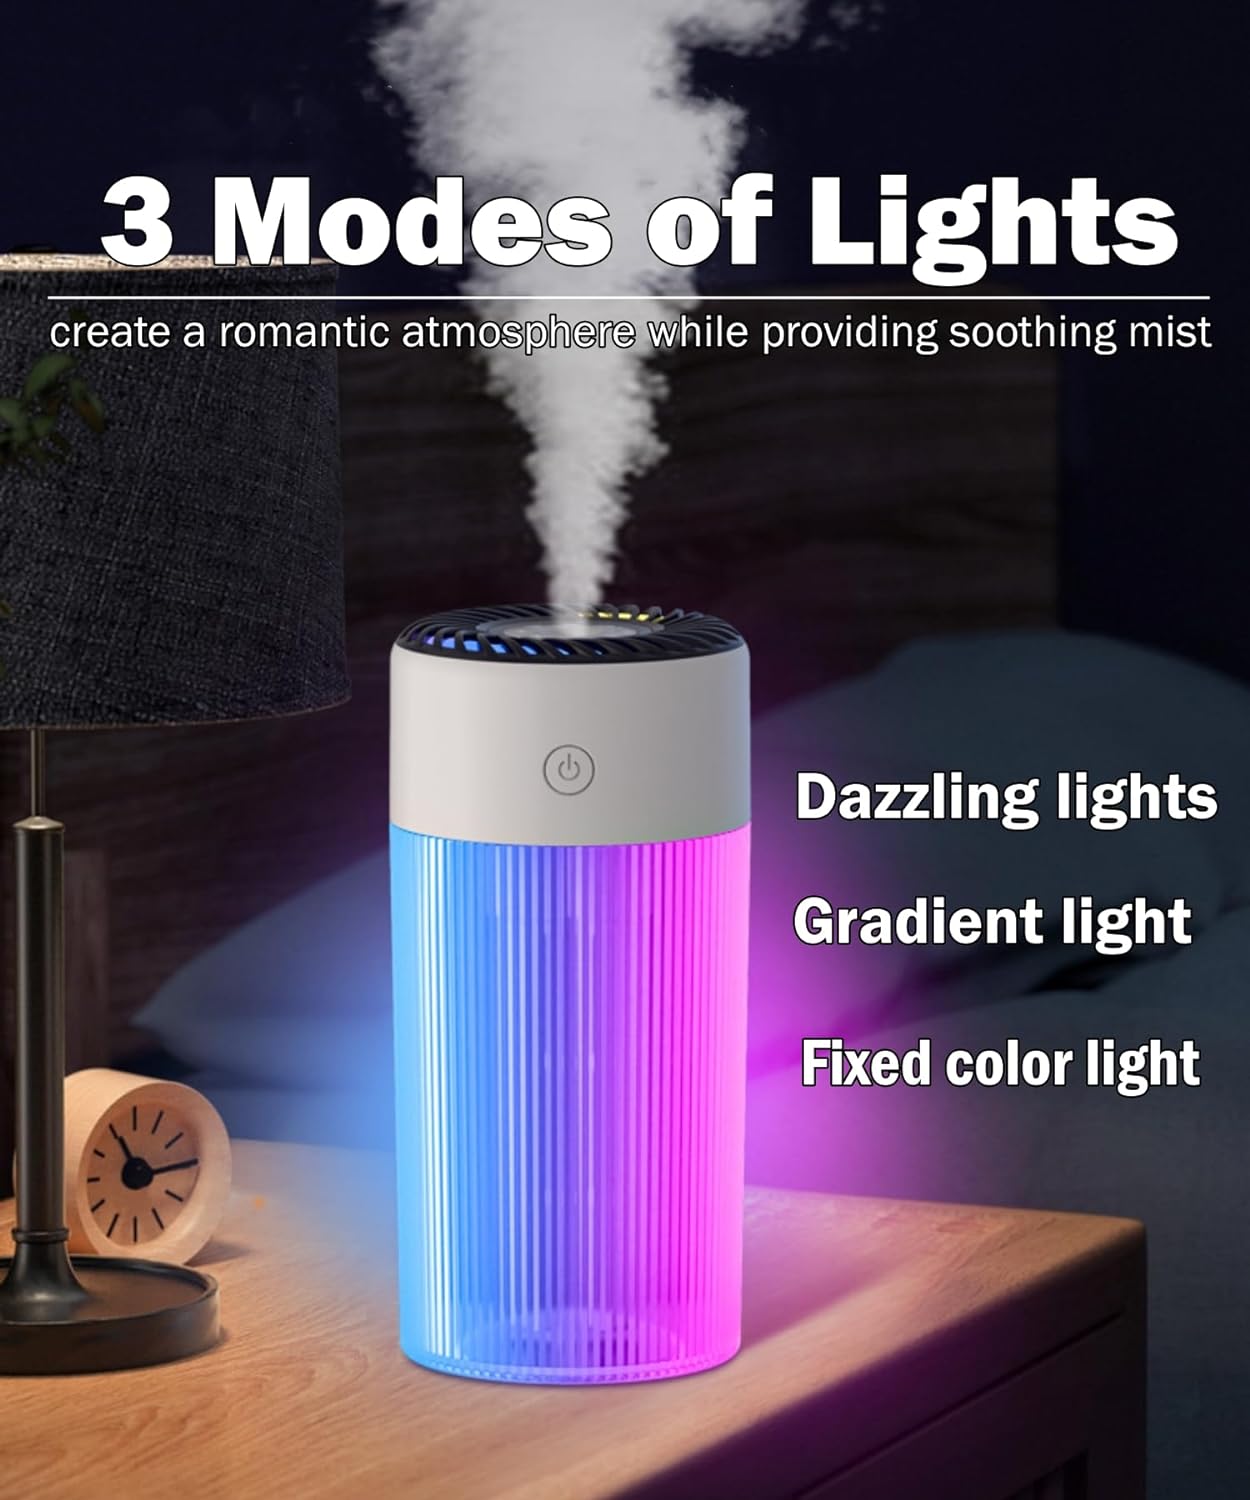 Mini Humidifier, 350ML Small Personal USB Cool Mist Humidifiers with Colorful Light, 2 Spray Modes, Auto Shut-Off, Ultra-Quiet Portable Air Humidifier for Car Home Bedroom Office Desktop (Clear)